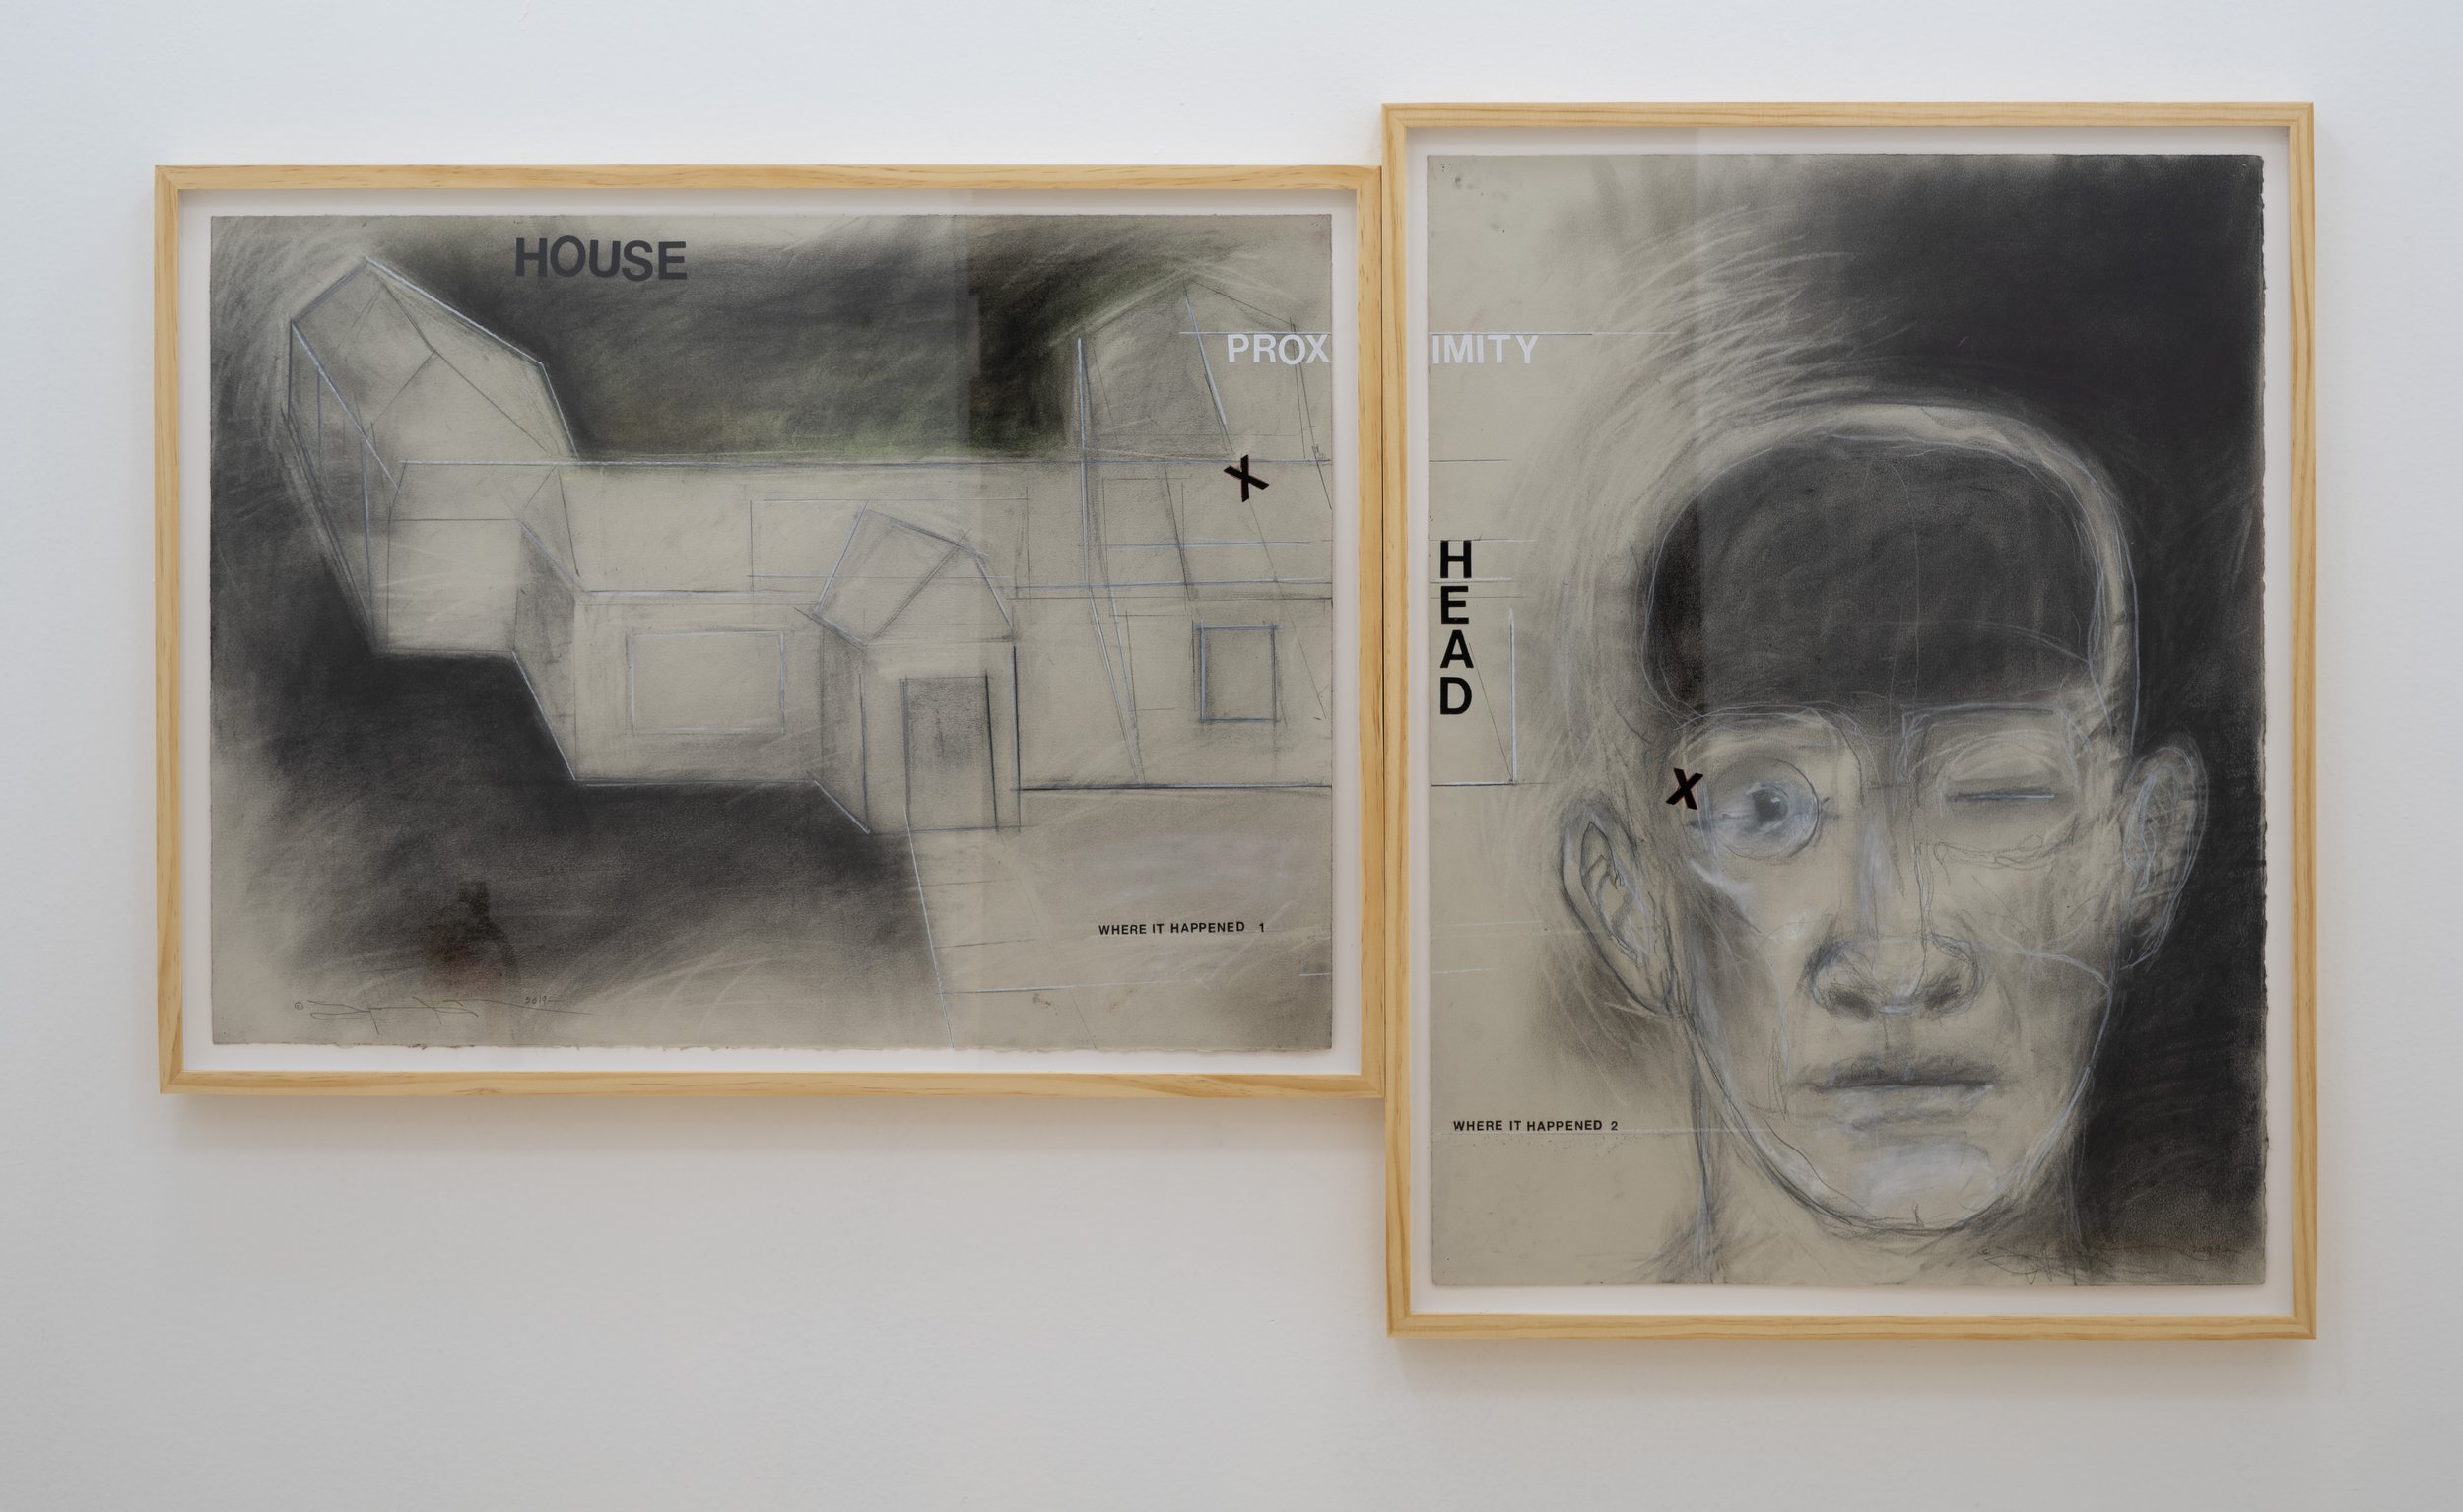   Terry Allen,    Proximity (diptych),      2019,  Graphite, pastel, gouache, colored pencil, press type, collage on paper, 32 ¾ x 57 ½ inches  Courtesy of the artist and L.A. Louver Gallery 